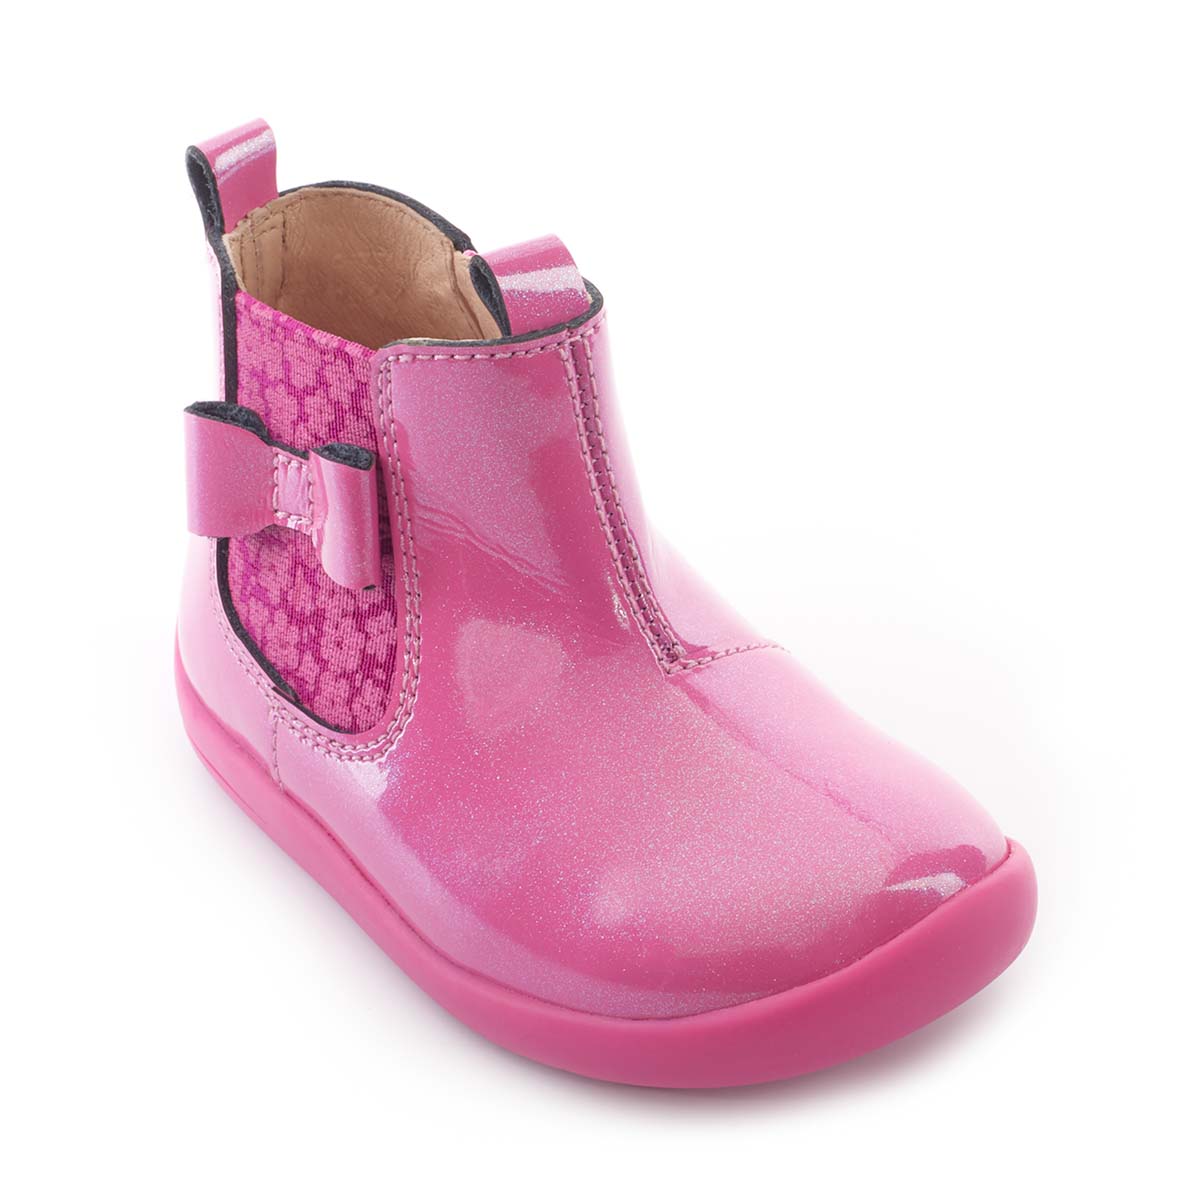 Start Rite - Wonderland Chelsea In Pink 0789-16F In Size 5 In Plain Pink Infant Girls Boots  In Pink For kids